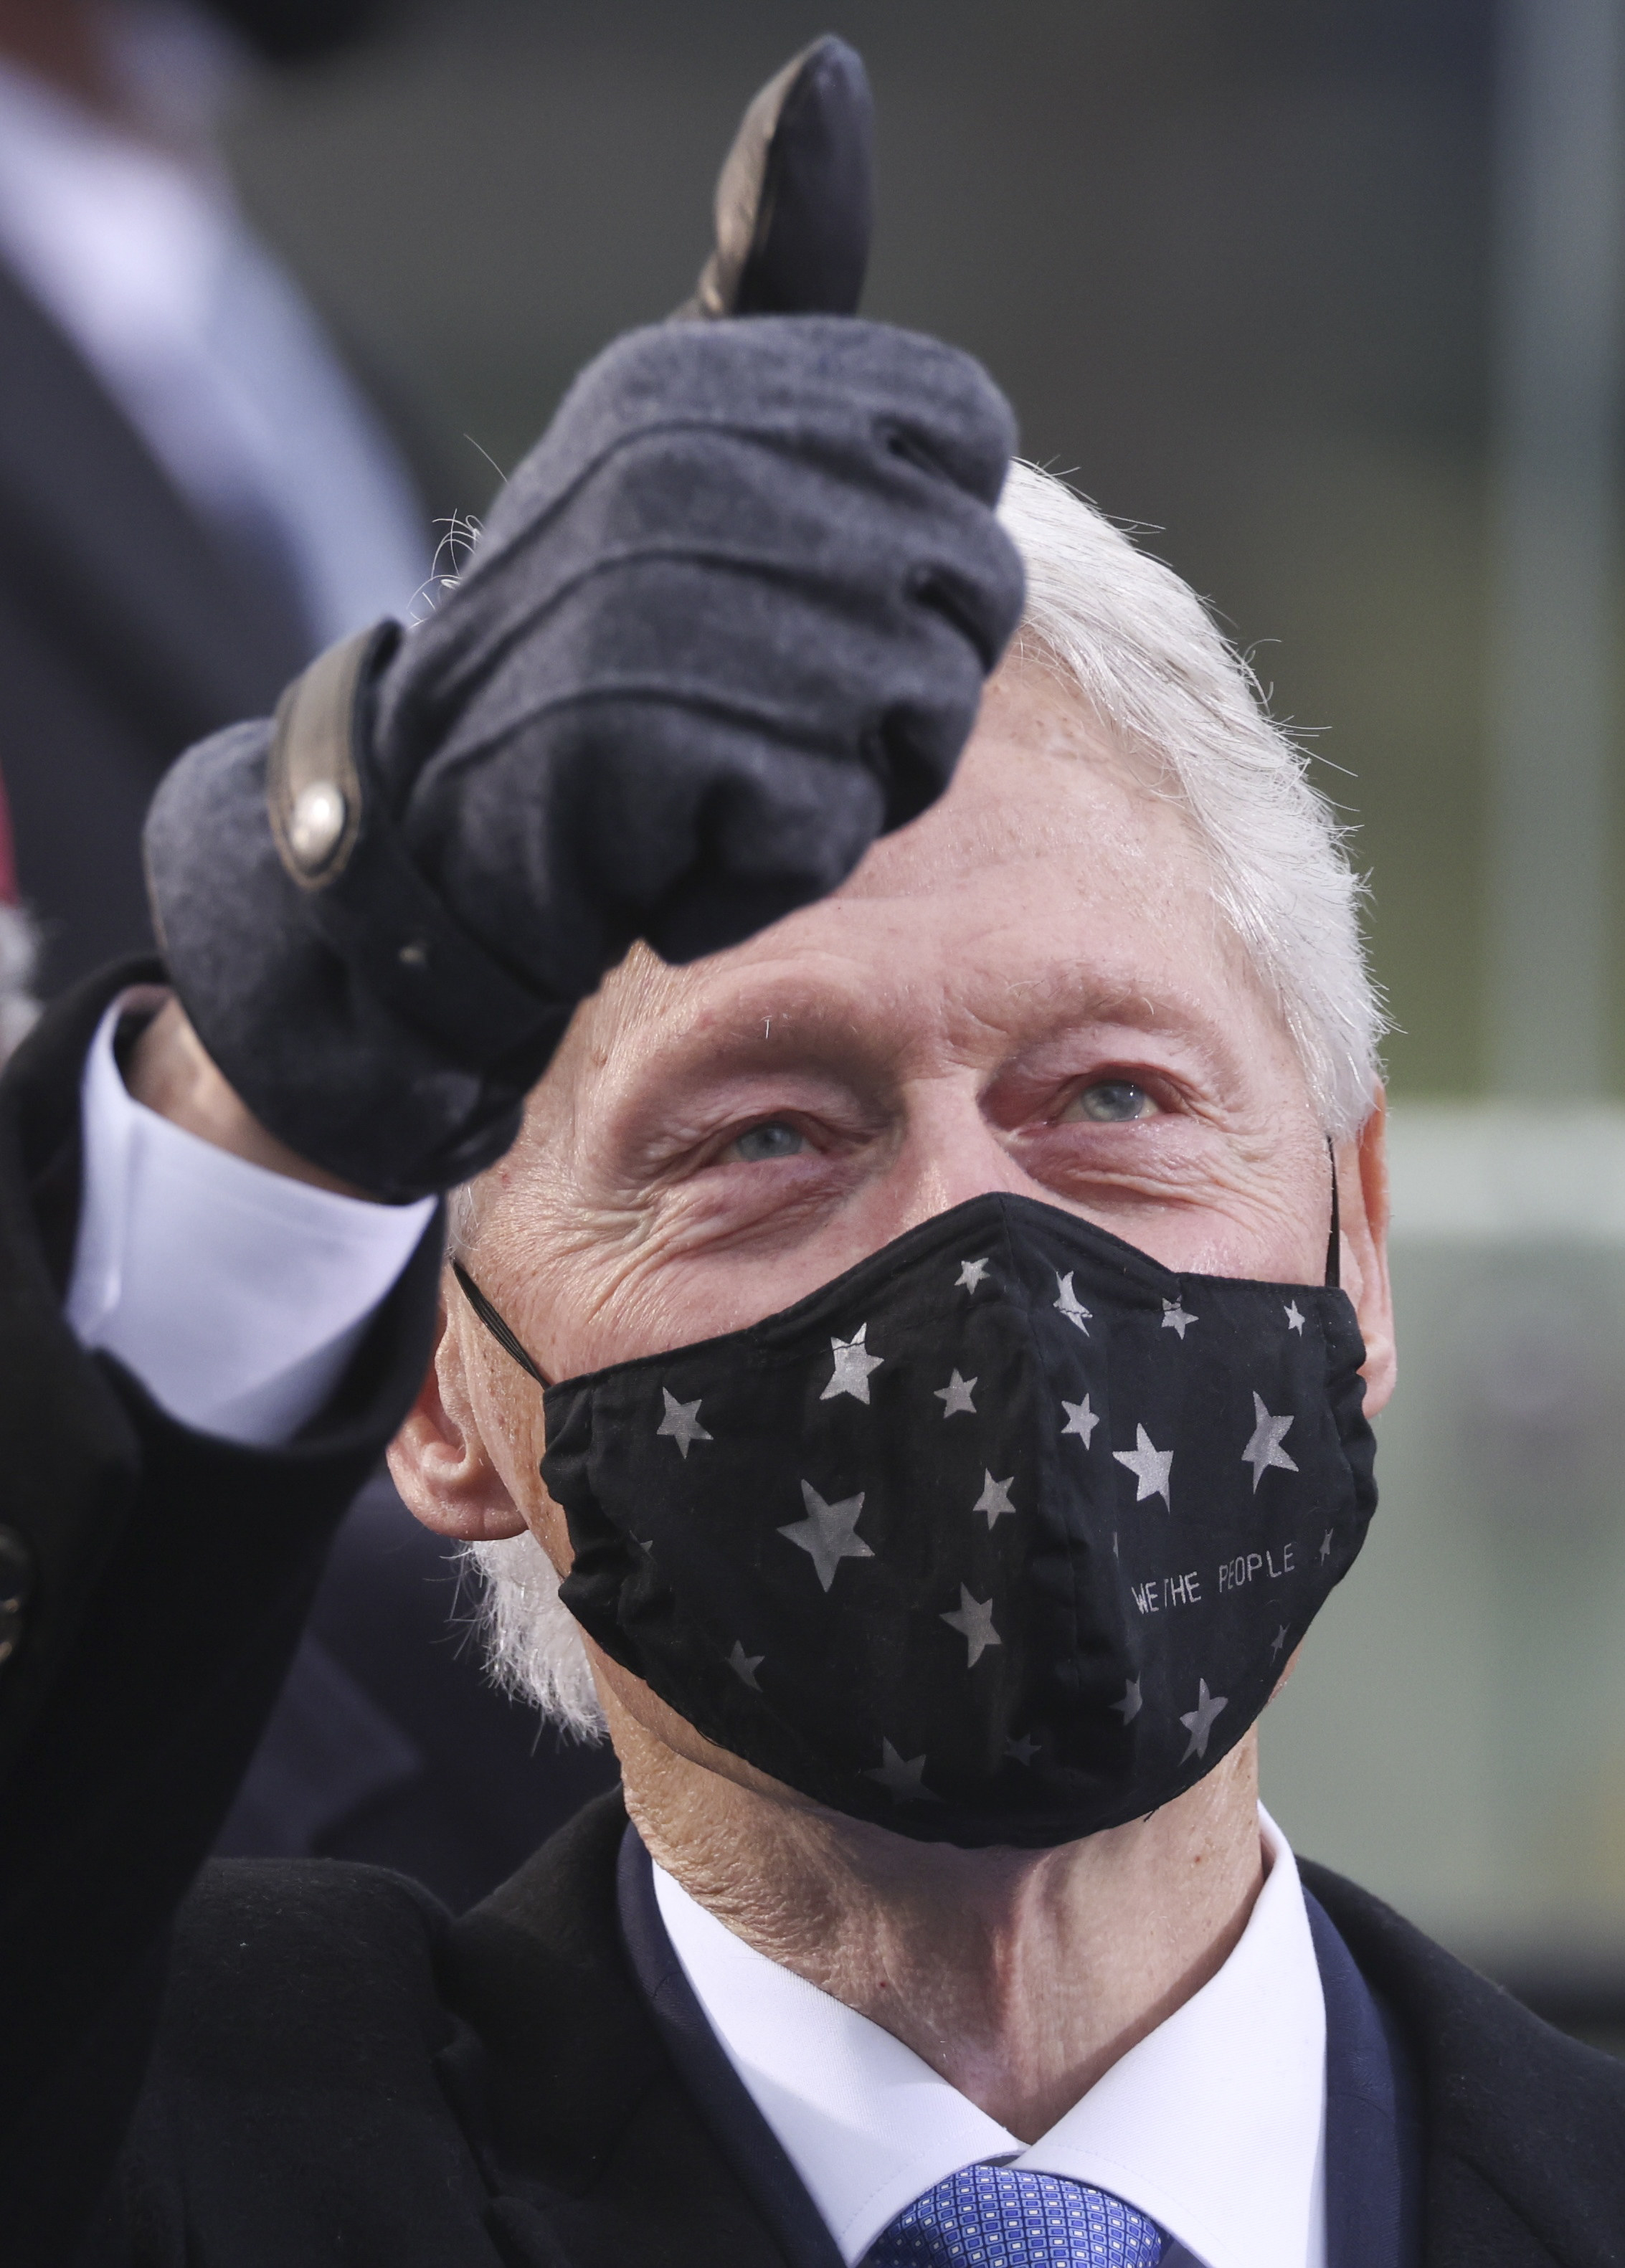 Bill Clinton wearing a black face mask with stars and giving a thumbs up at the inaguration.